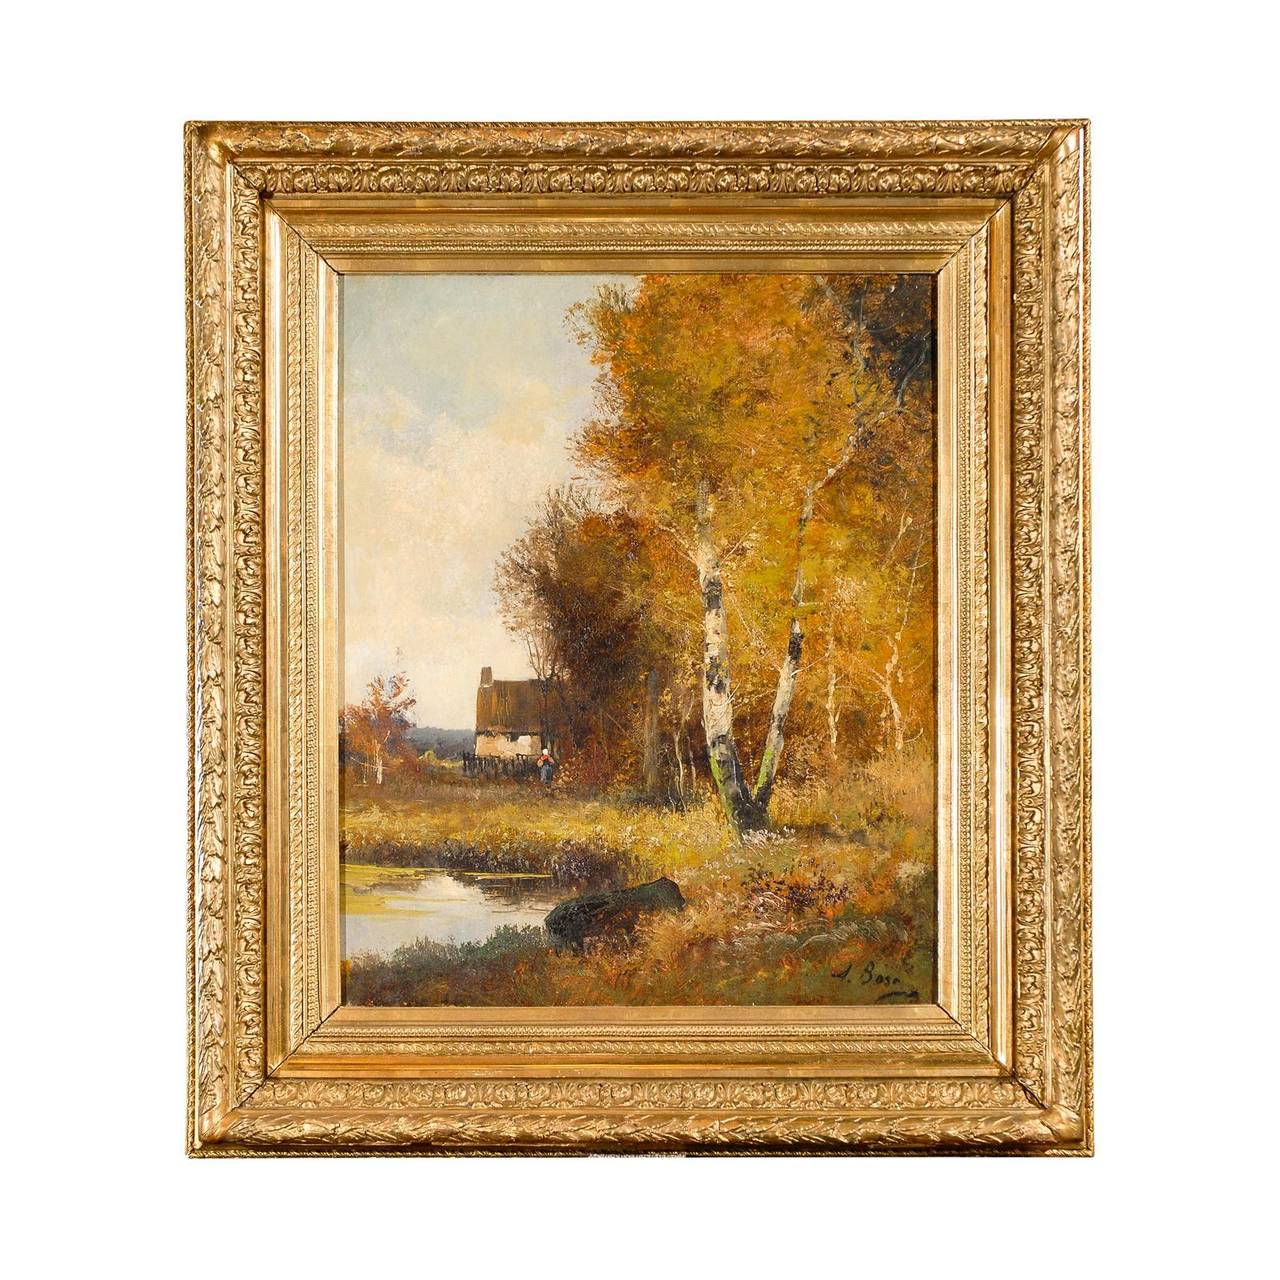 Landscape with original frame with beautiful patina. Signed.